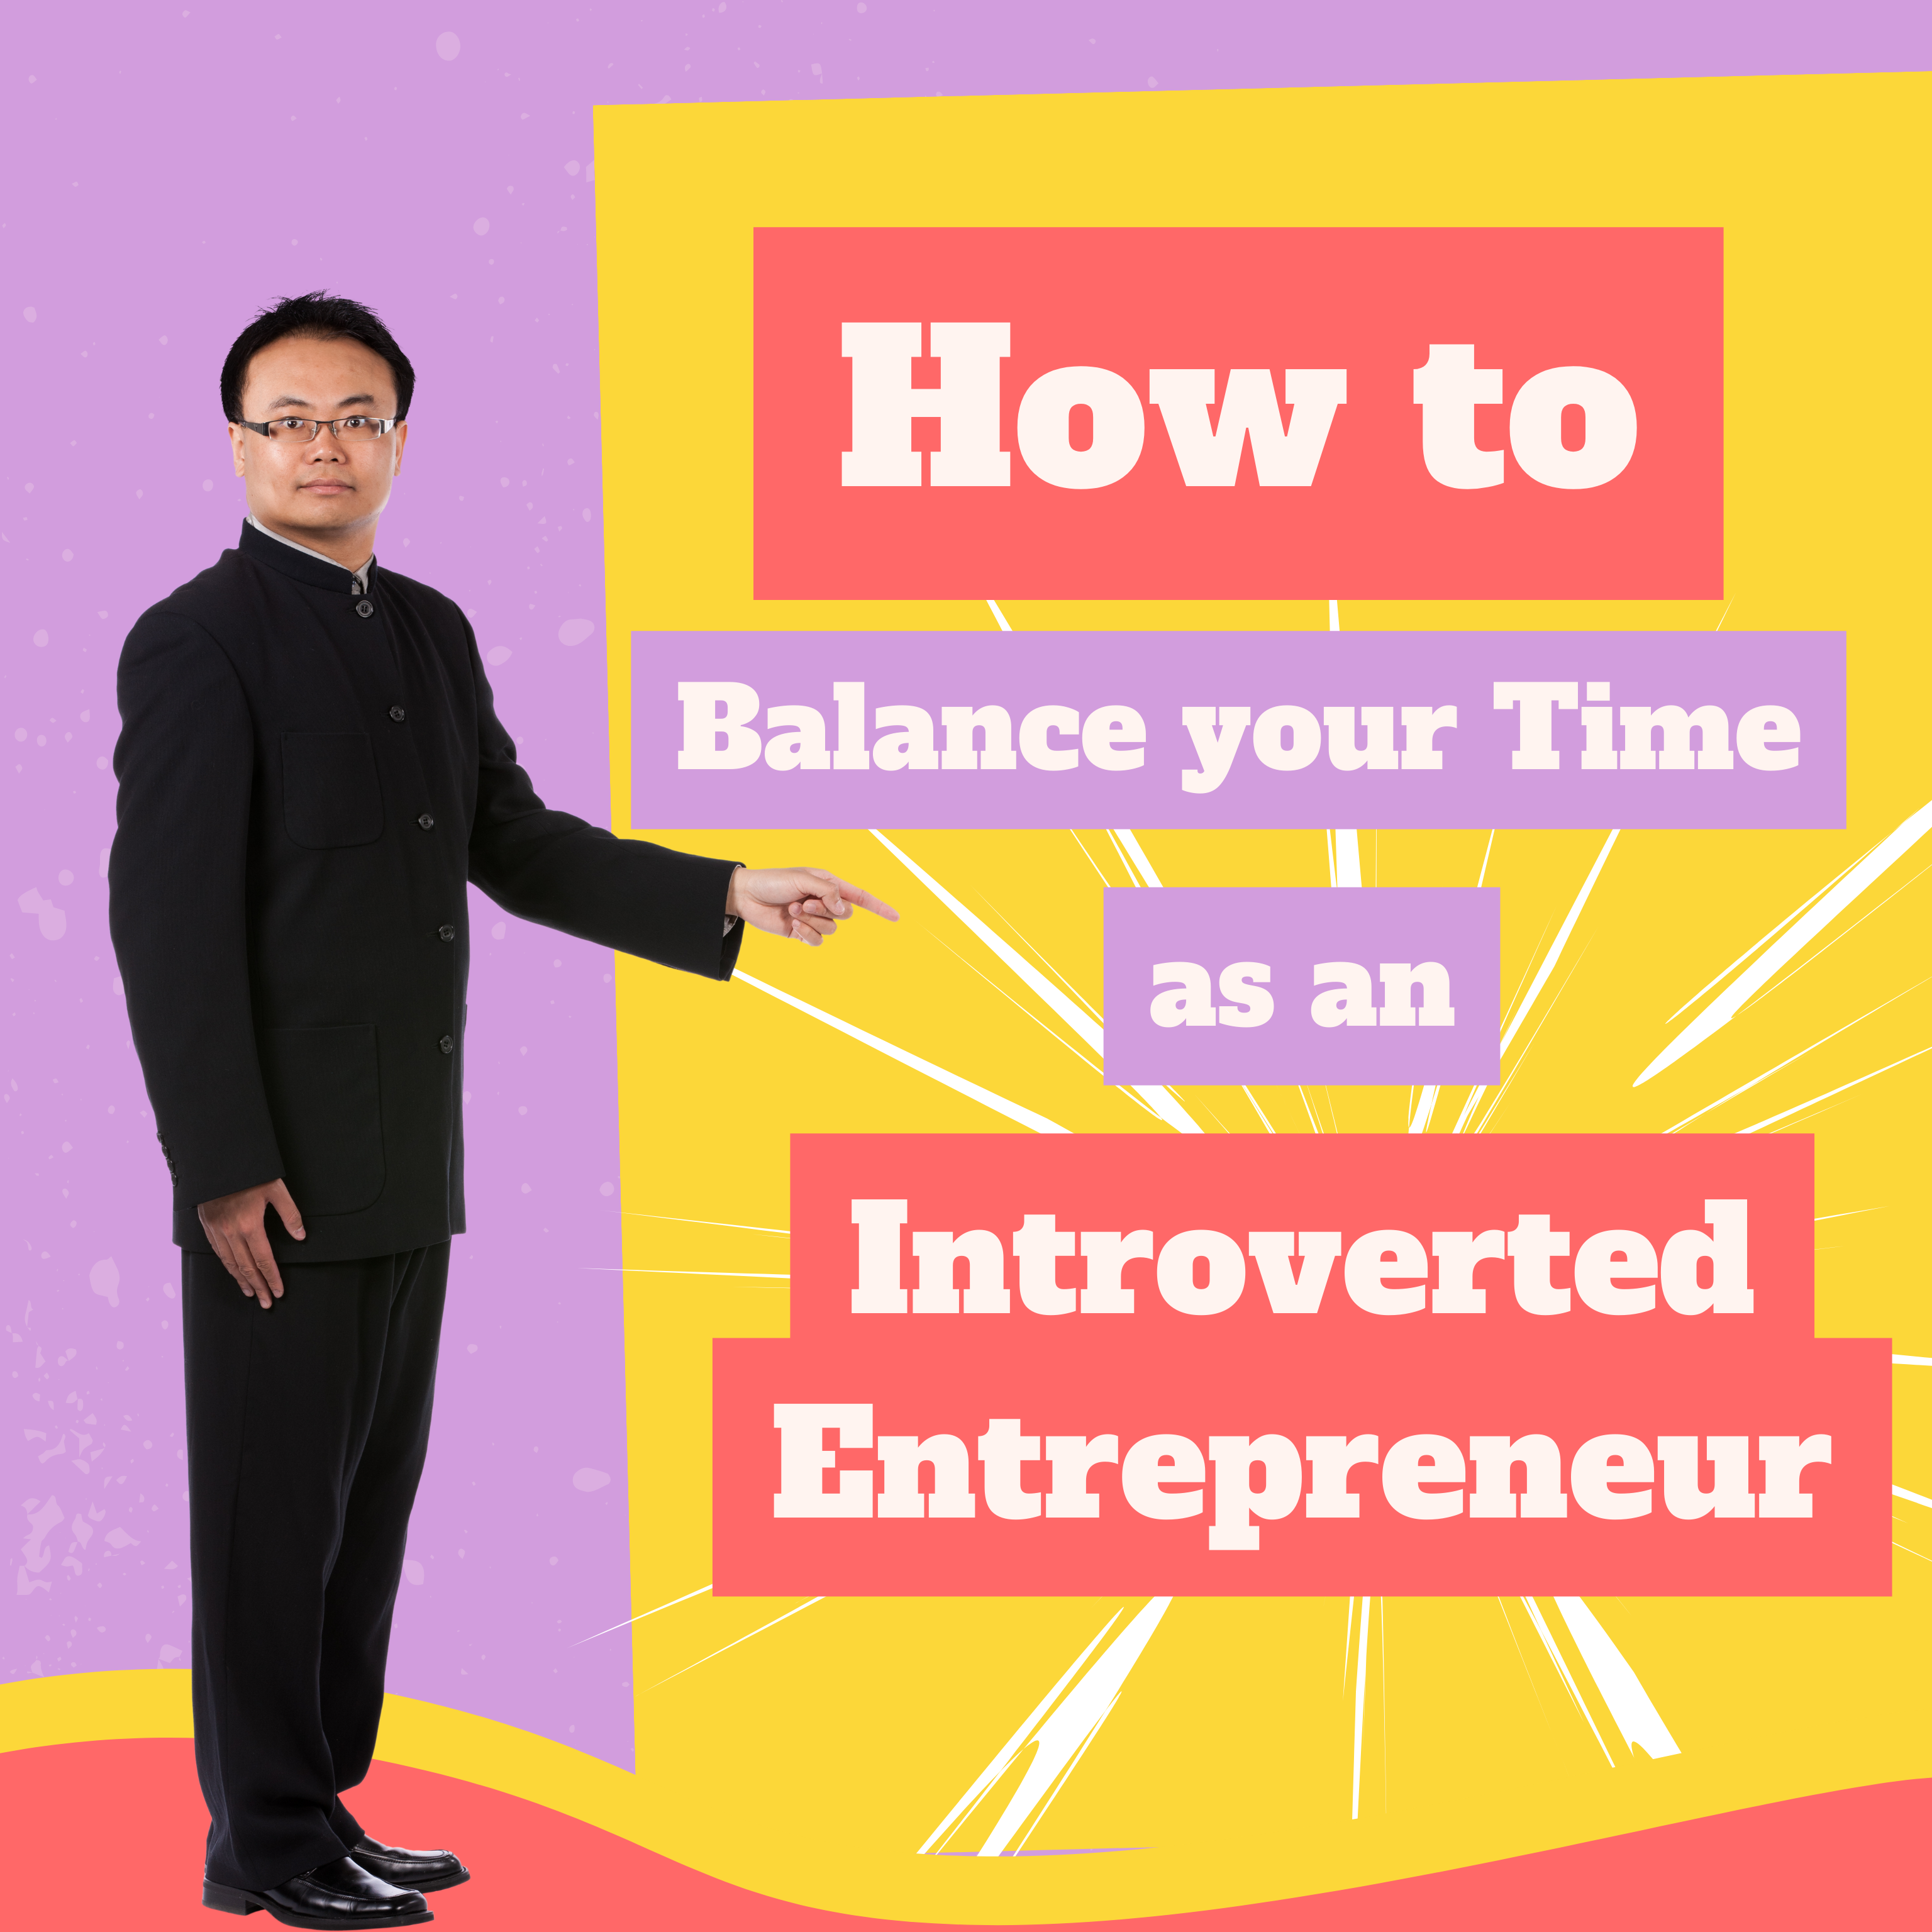 Being an introverted entrepreneur and finding a happy balance with your time: 5 strategies